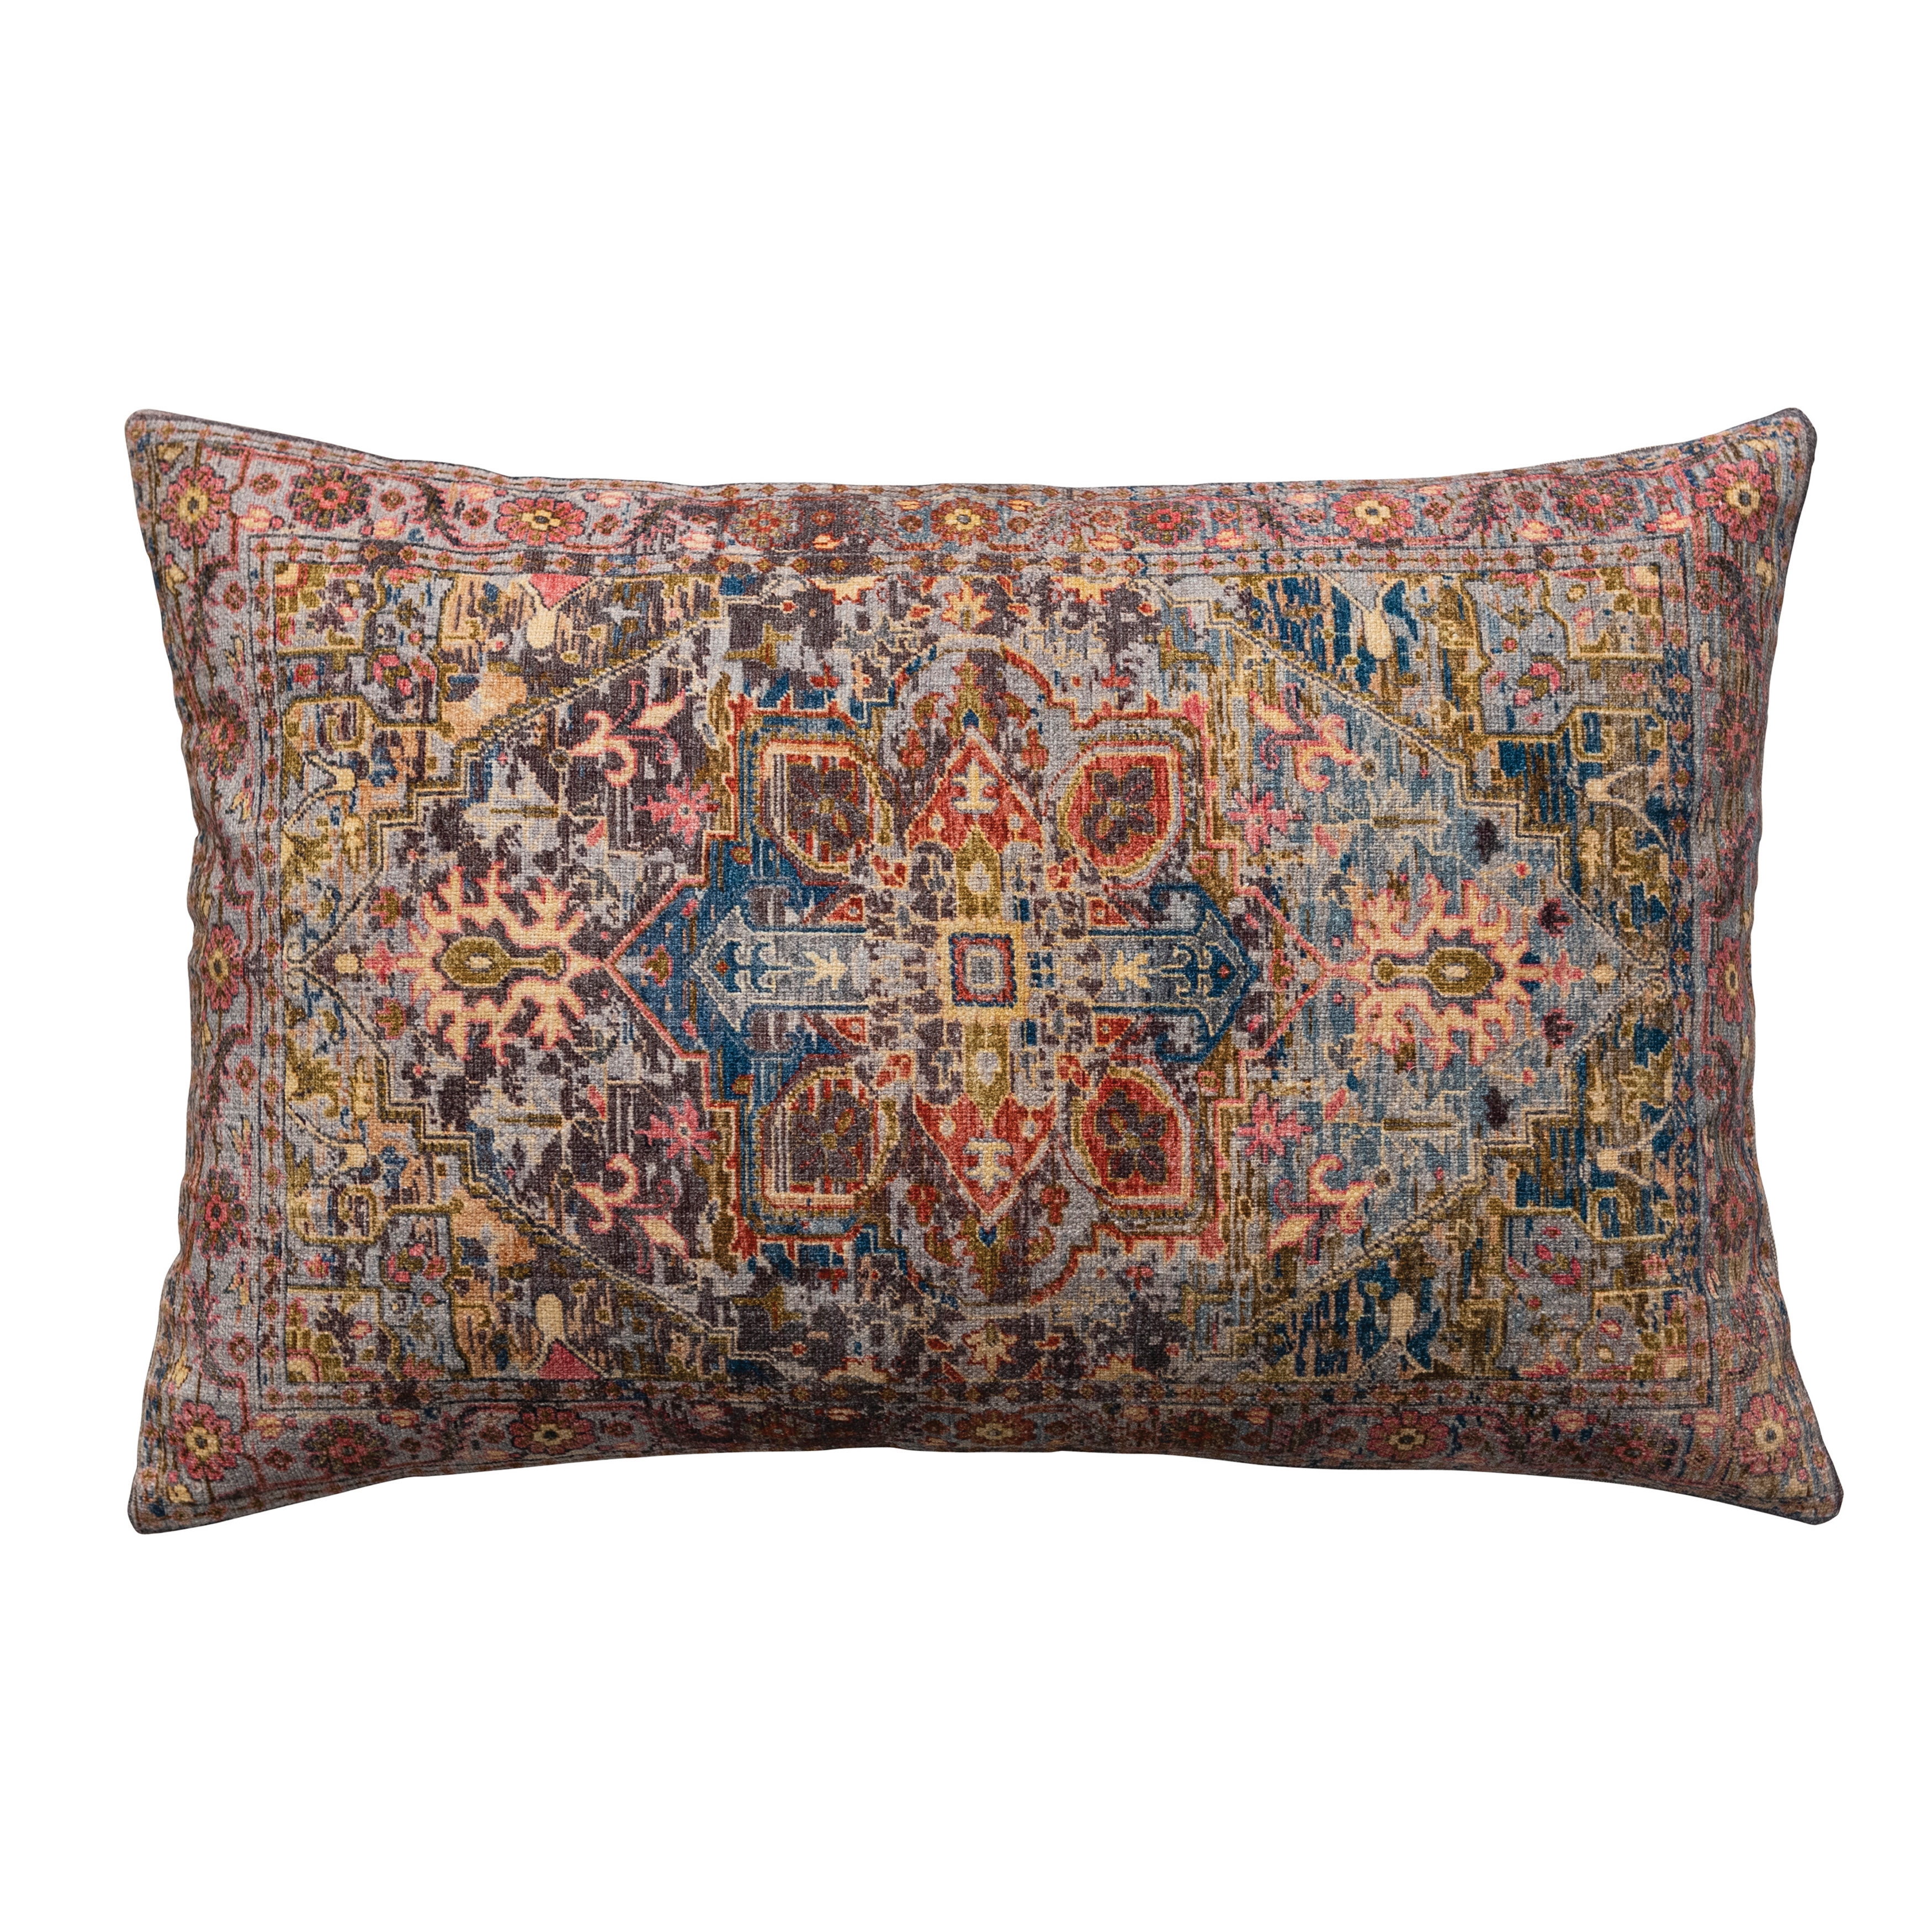 24 Inches Cotton Printed Lumbar Pillow with Pattern and Chambray Back, Multicolored - Image 0